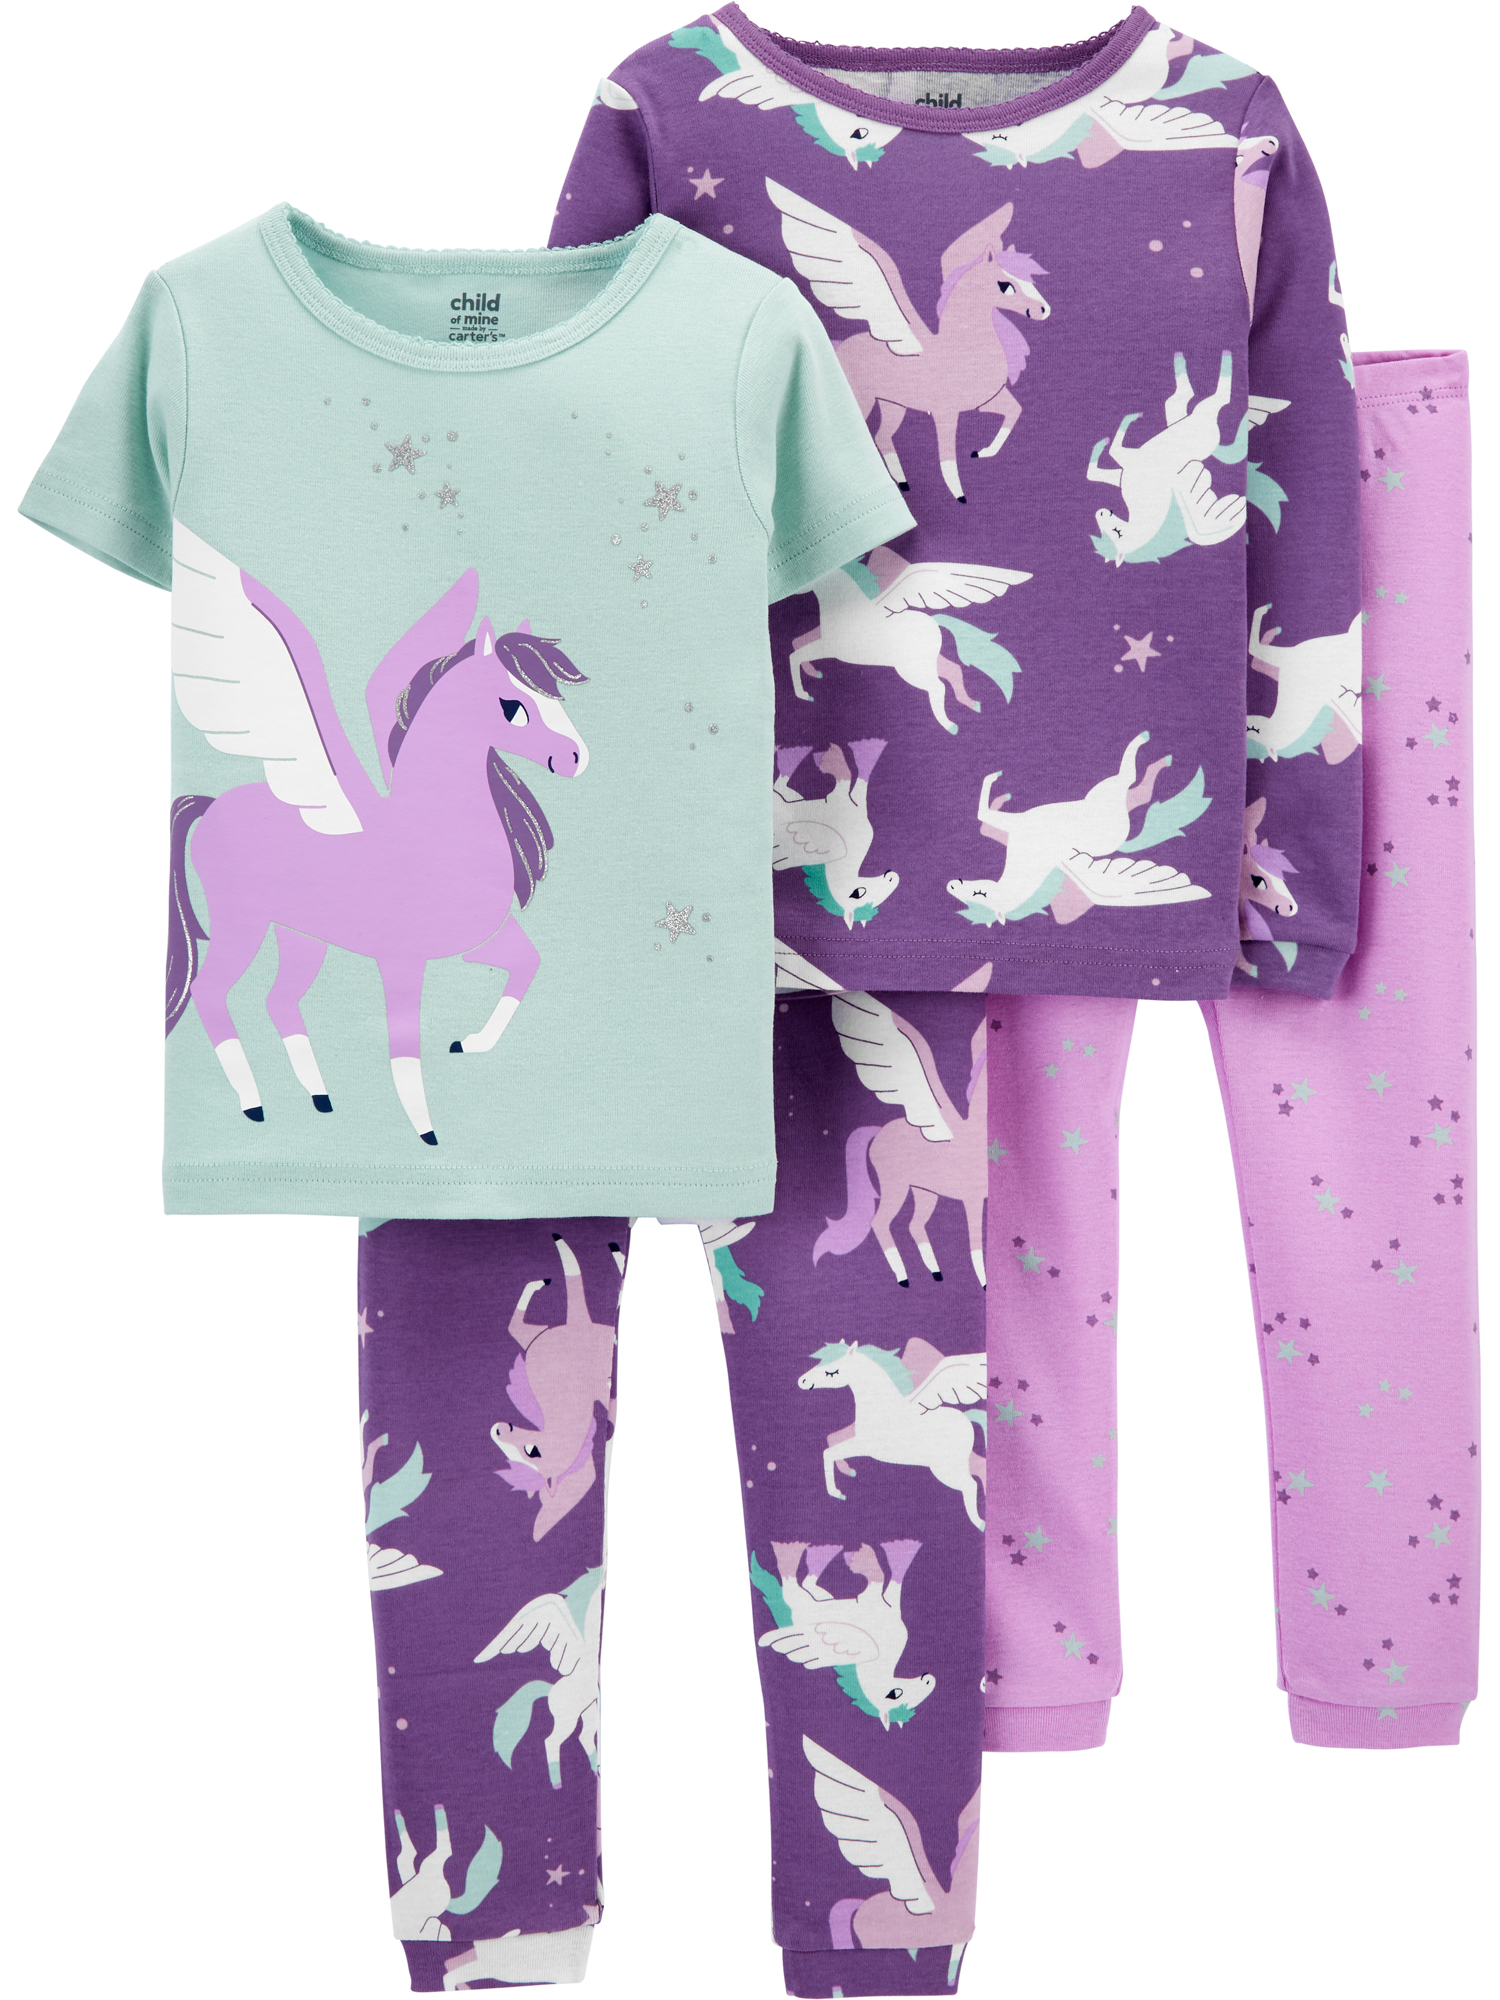 Carter's Child of Mine Baby and Toddler Girl Snug-Fit Short Sleeve and Long Sleeve Pajamas, 4-Piece, Sizes 12M-5T - image 1 of 3